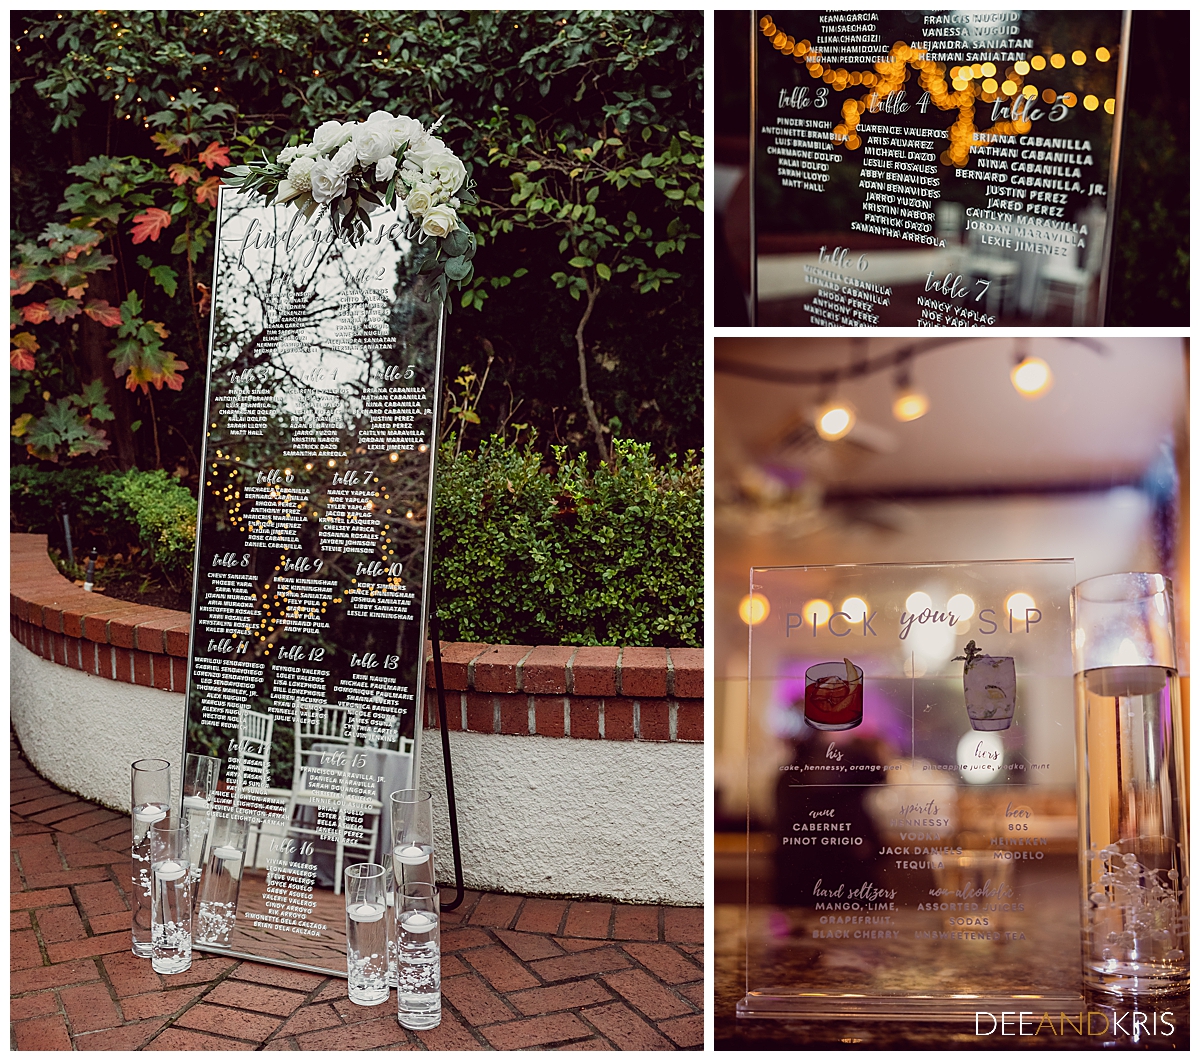 Three images of etched glass signs such as seating arrangement and signature drinks.